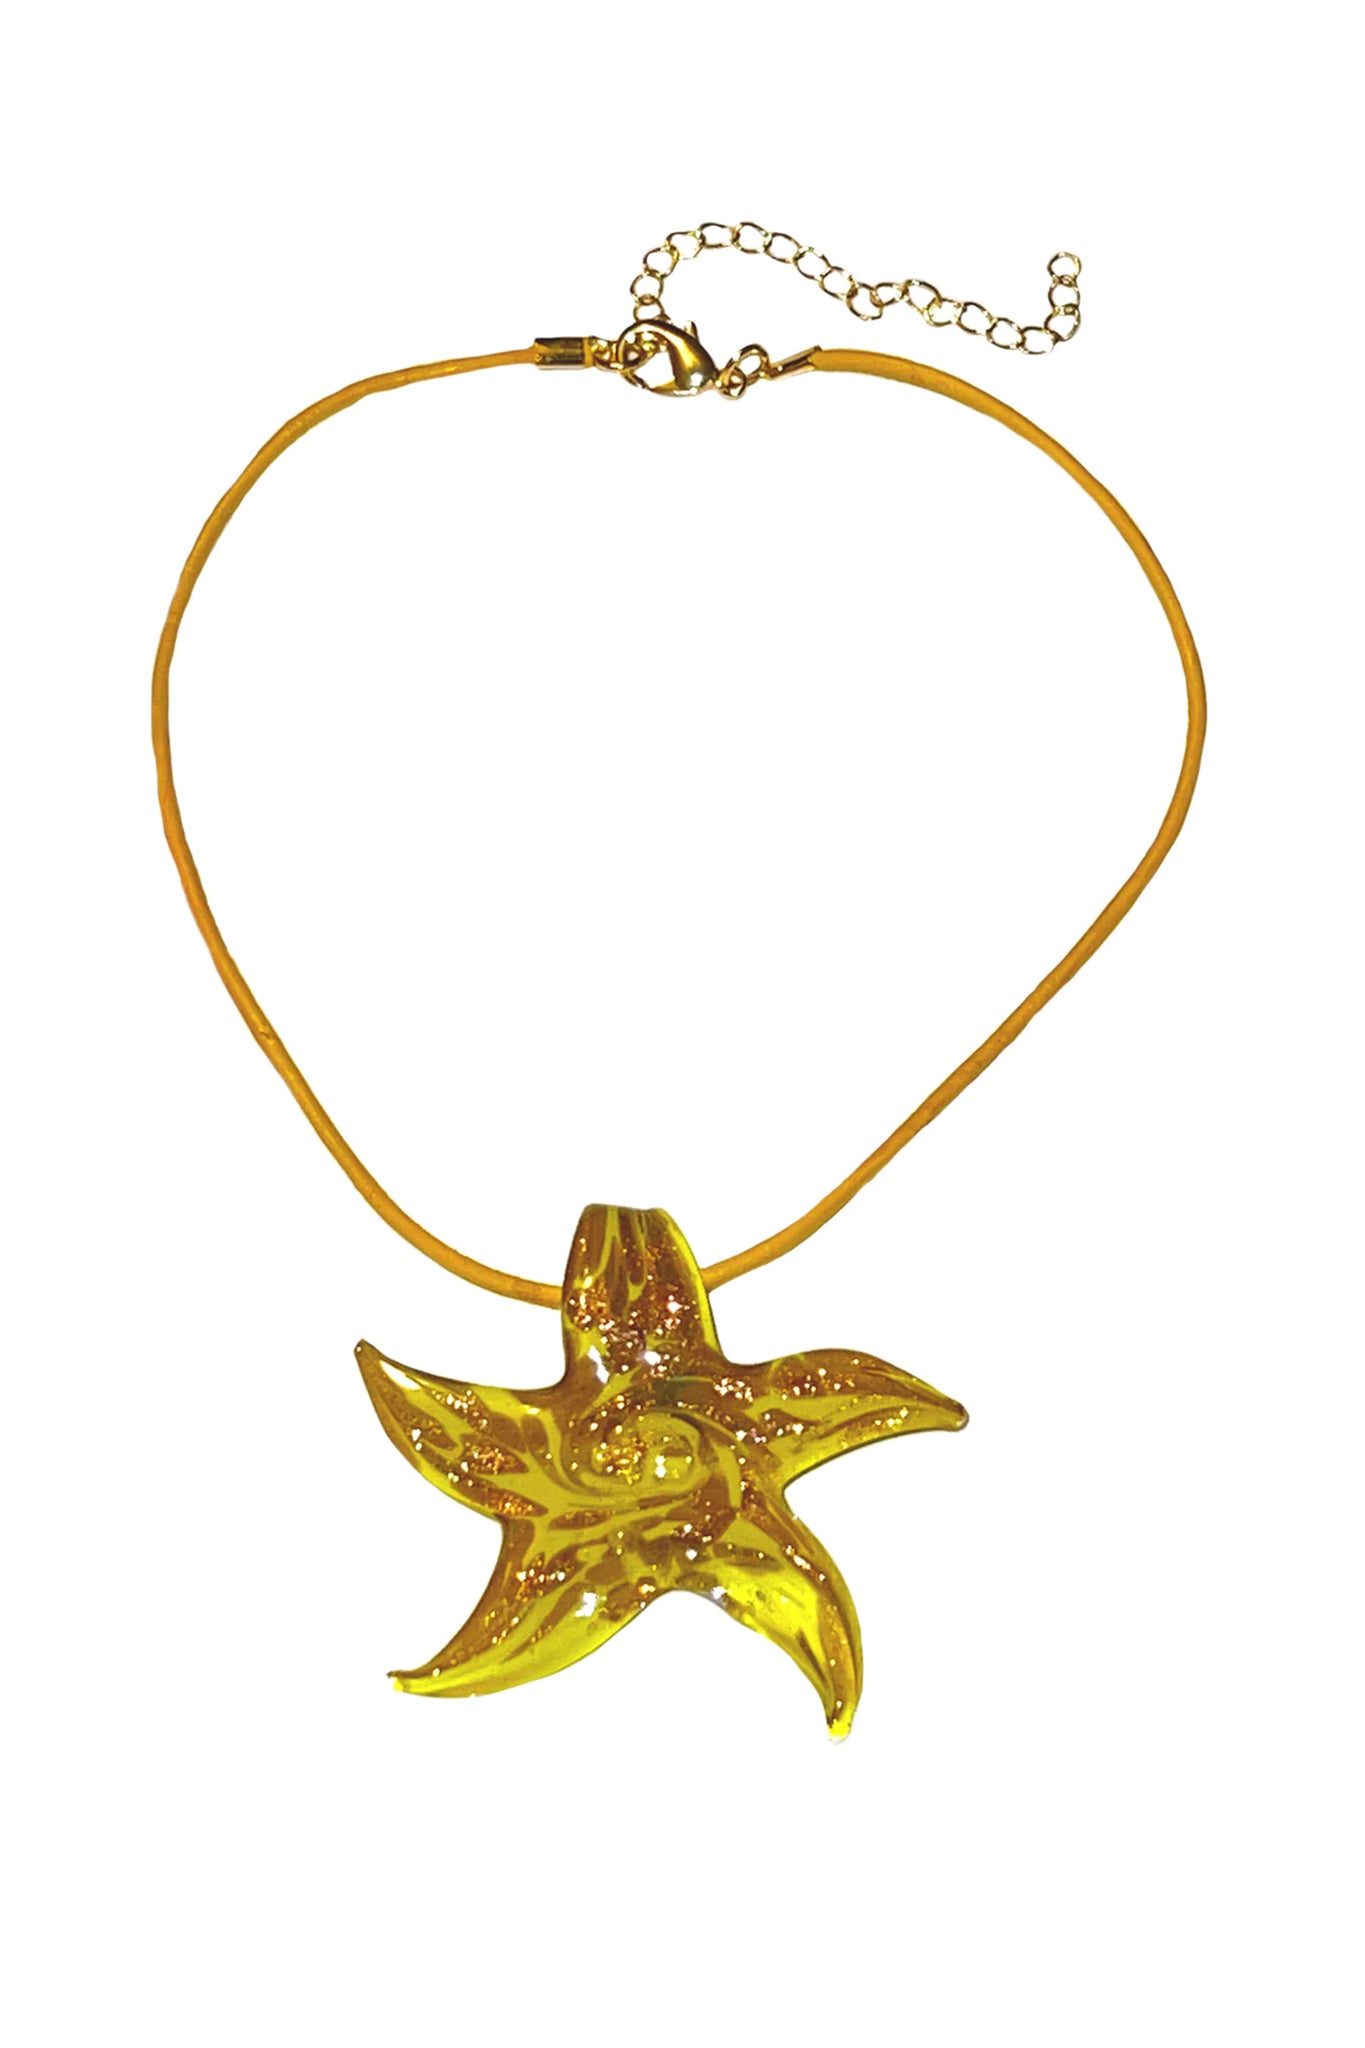 YELLOW STAR FISH NECKLACE